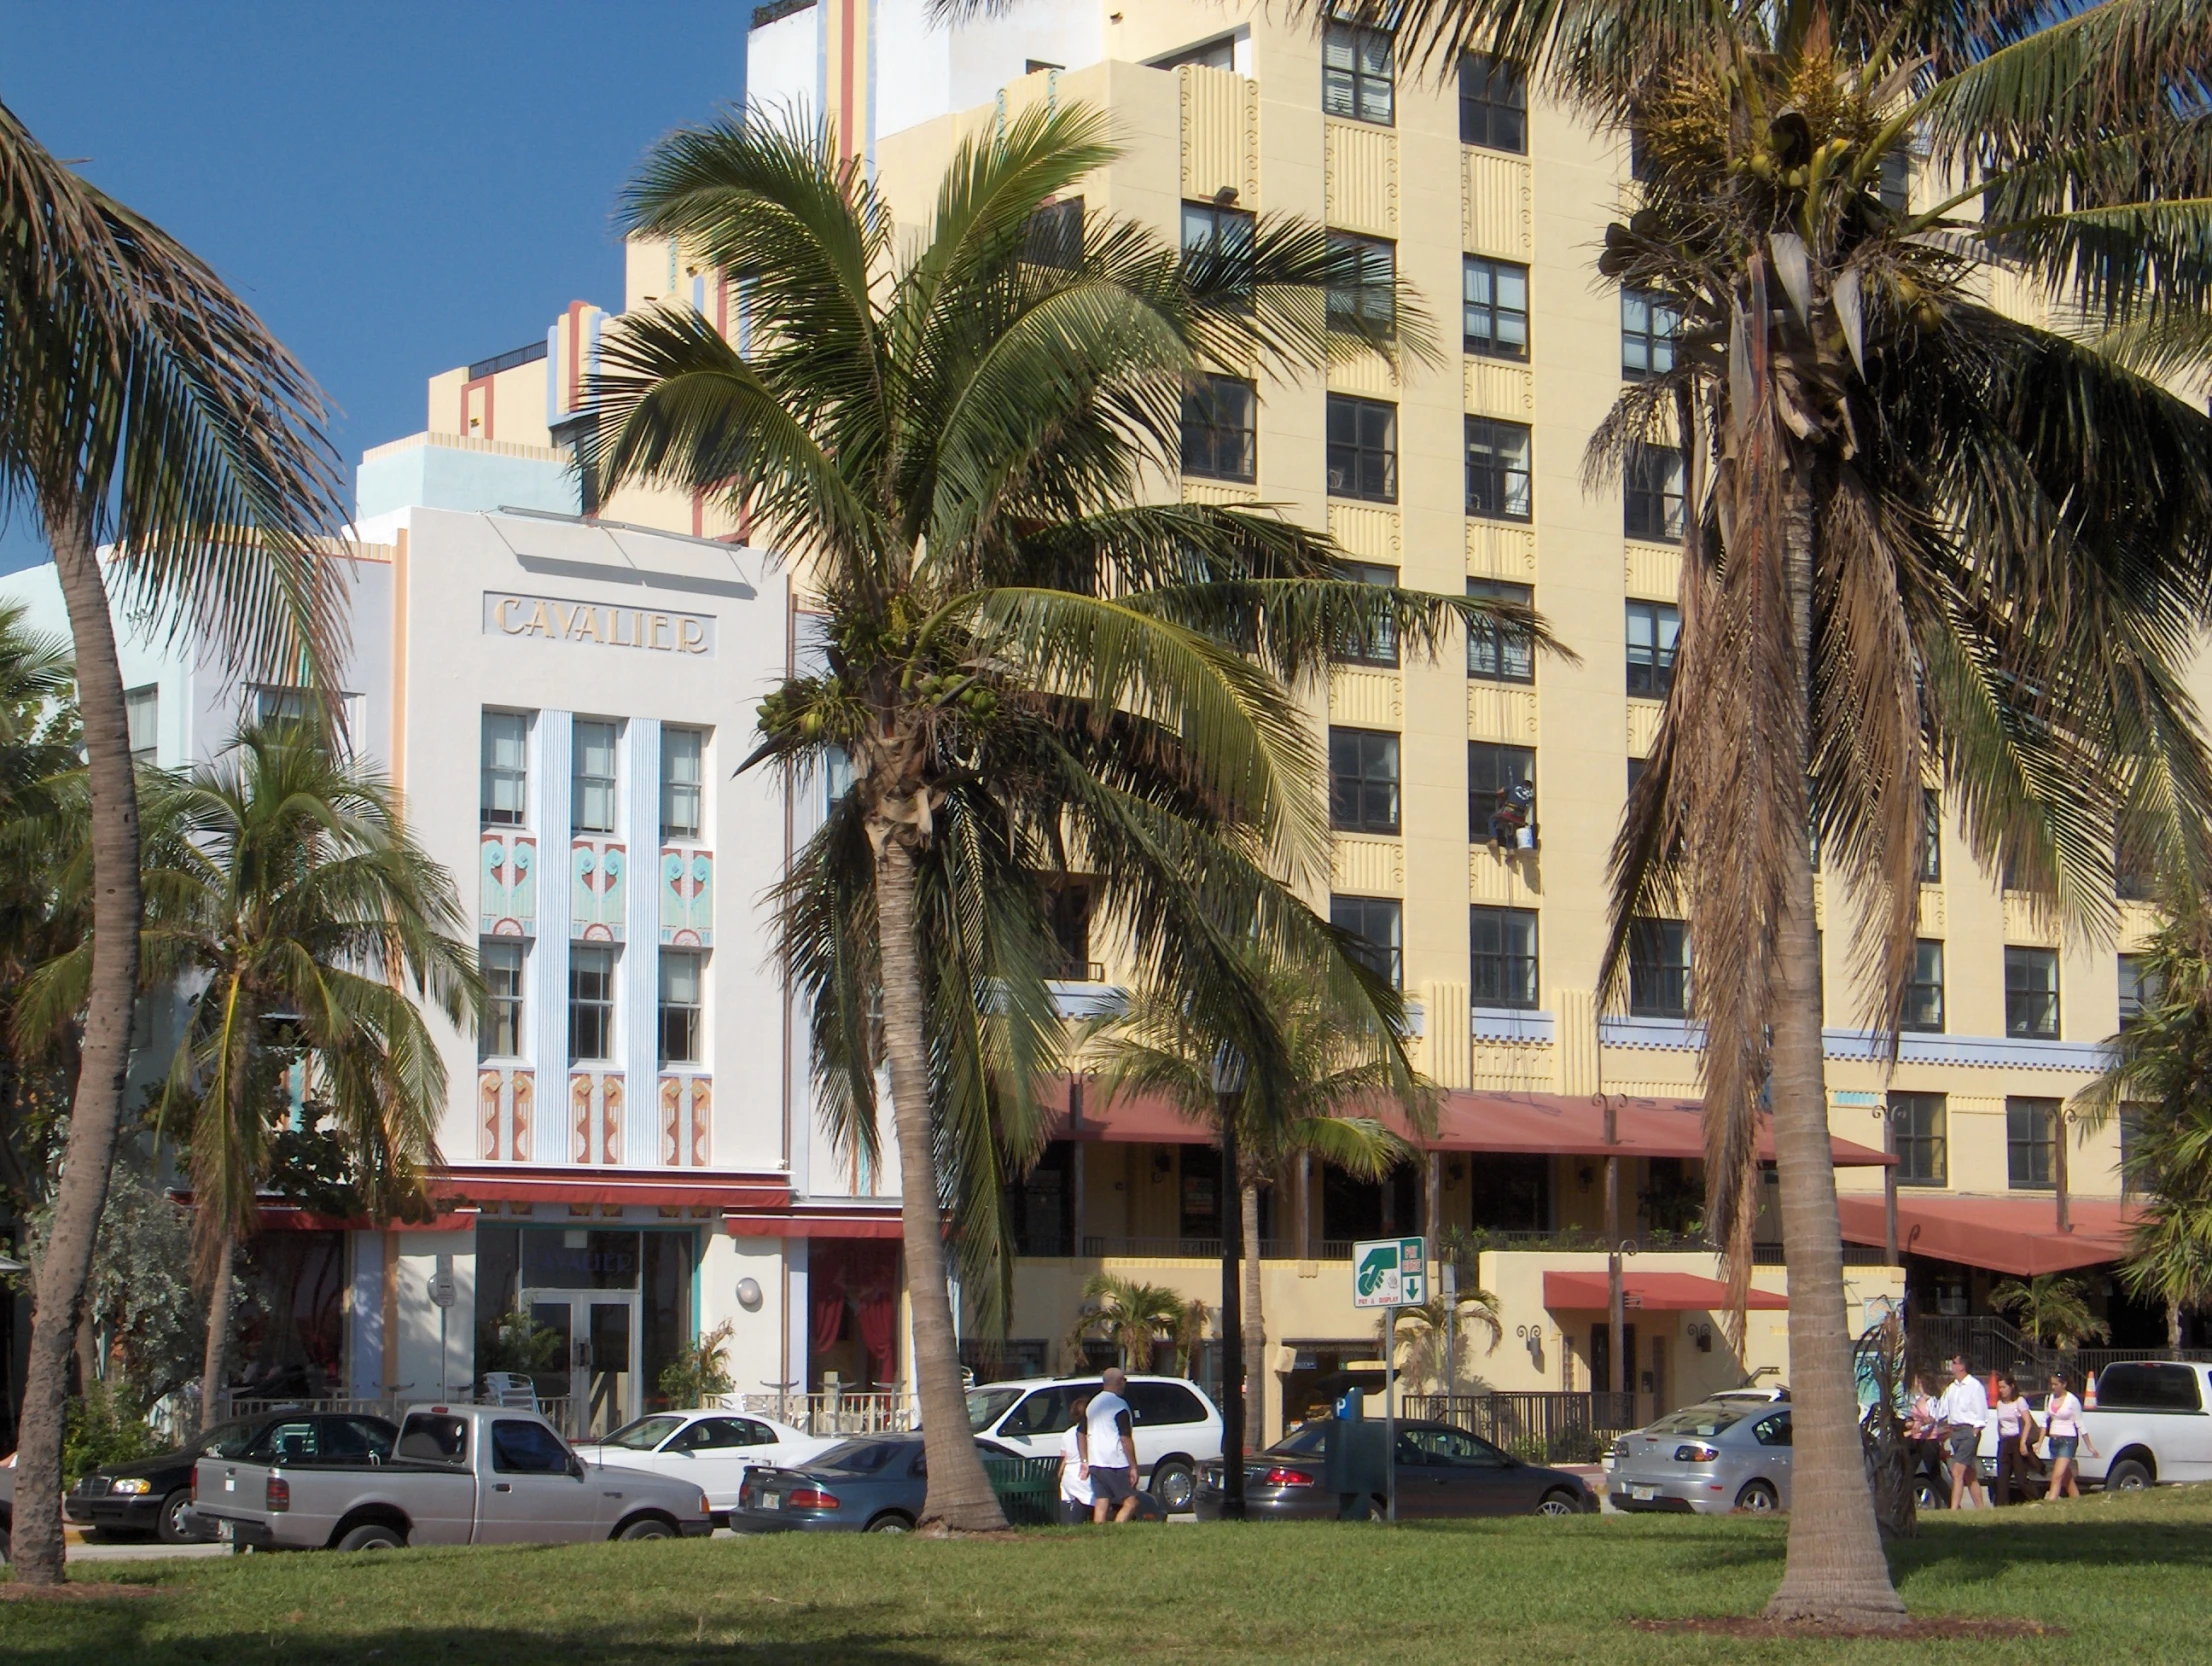 palm trees surrounding the city buildings with parked cars in front of it